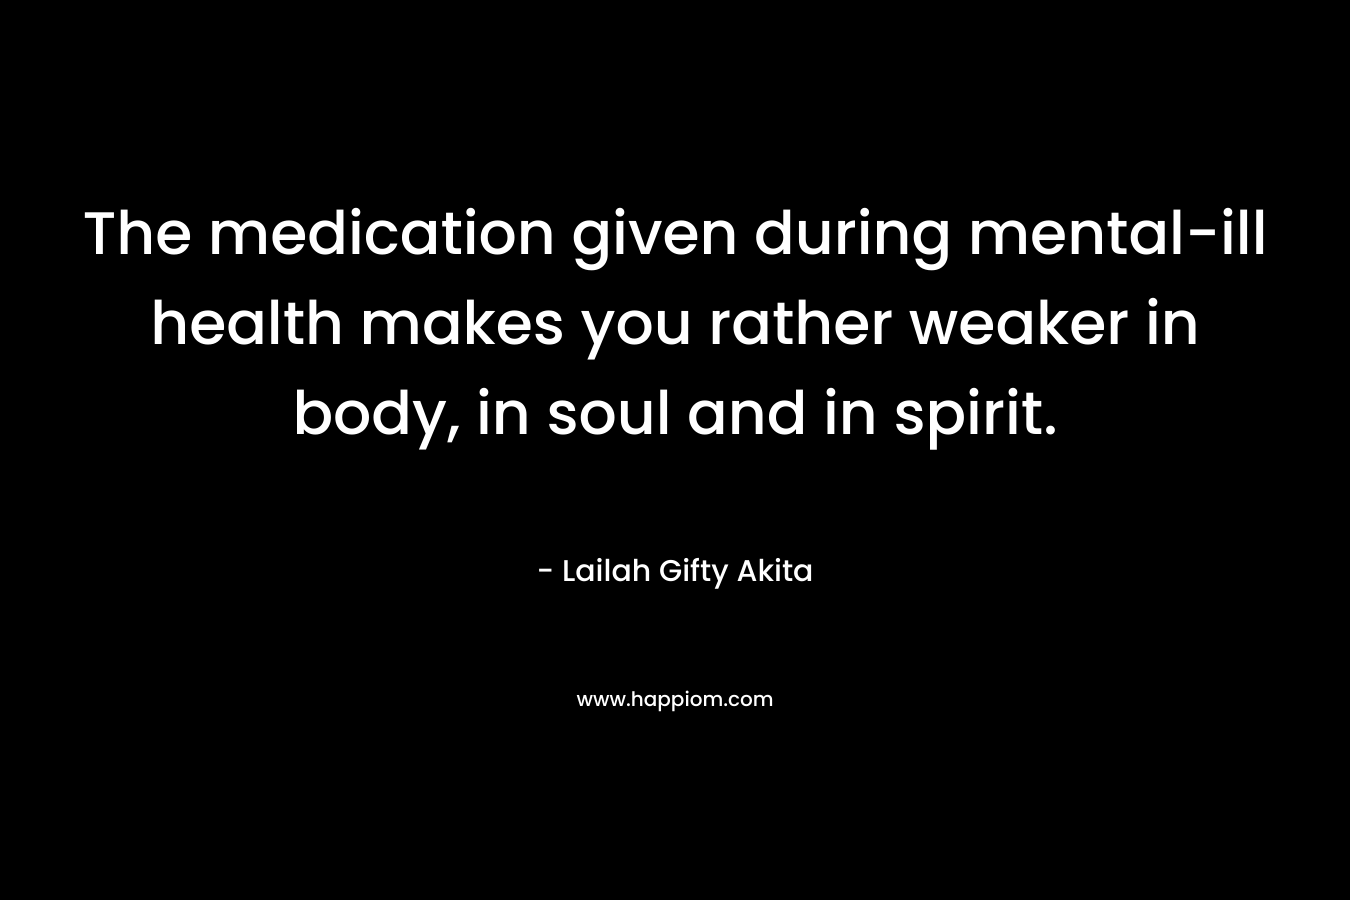 The medication given during mental-ill health makes you rather weaker in body, in soul and in spirit. – Lailah Gifty Akita